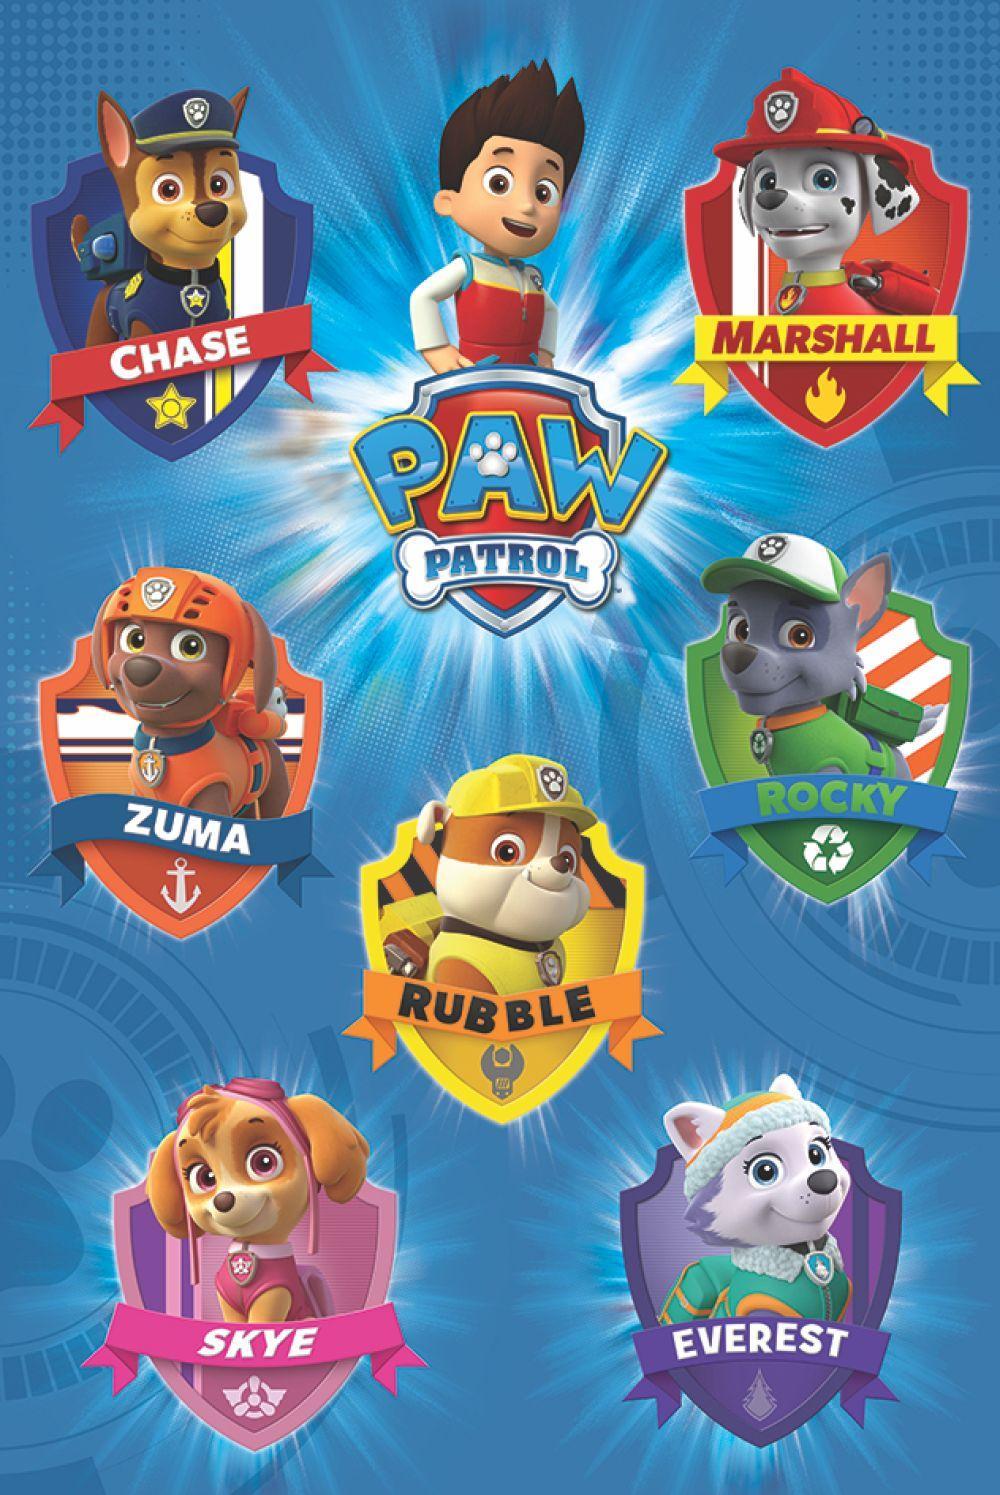 PAW Patrol on Twitter New wallpaper drop  You can find all our  wallpapers on our Instagram highlight httpstco2IyPw2ERQl  Twitter